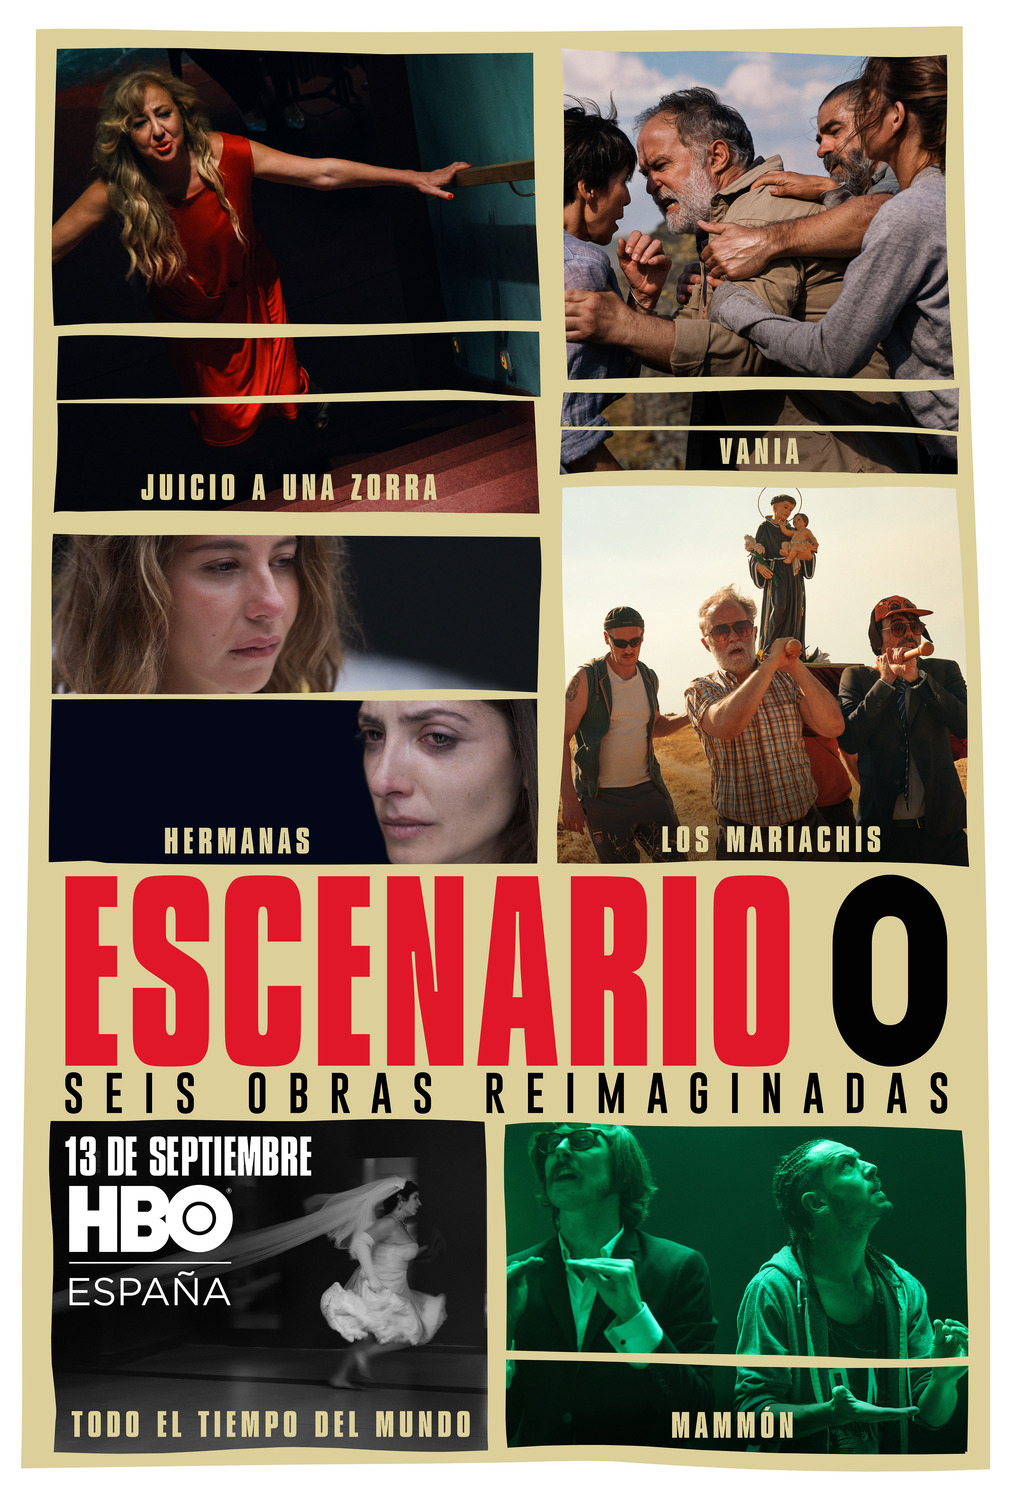 Extra Large TV Poster Image for Escenario 0 